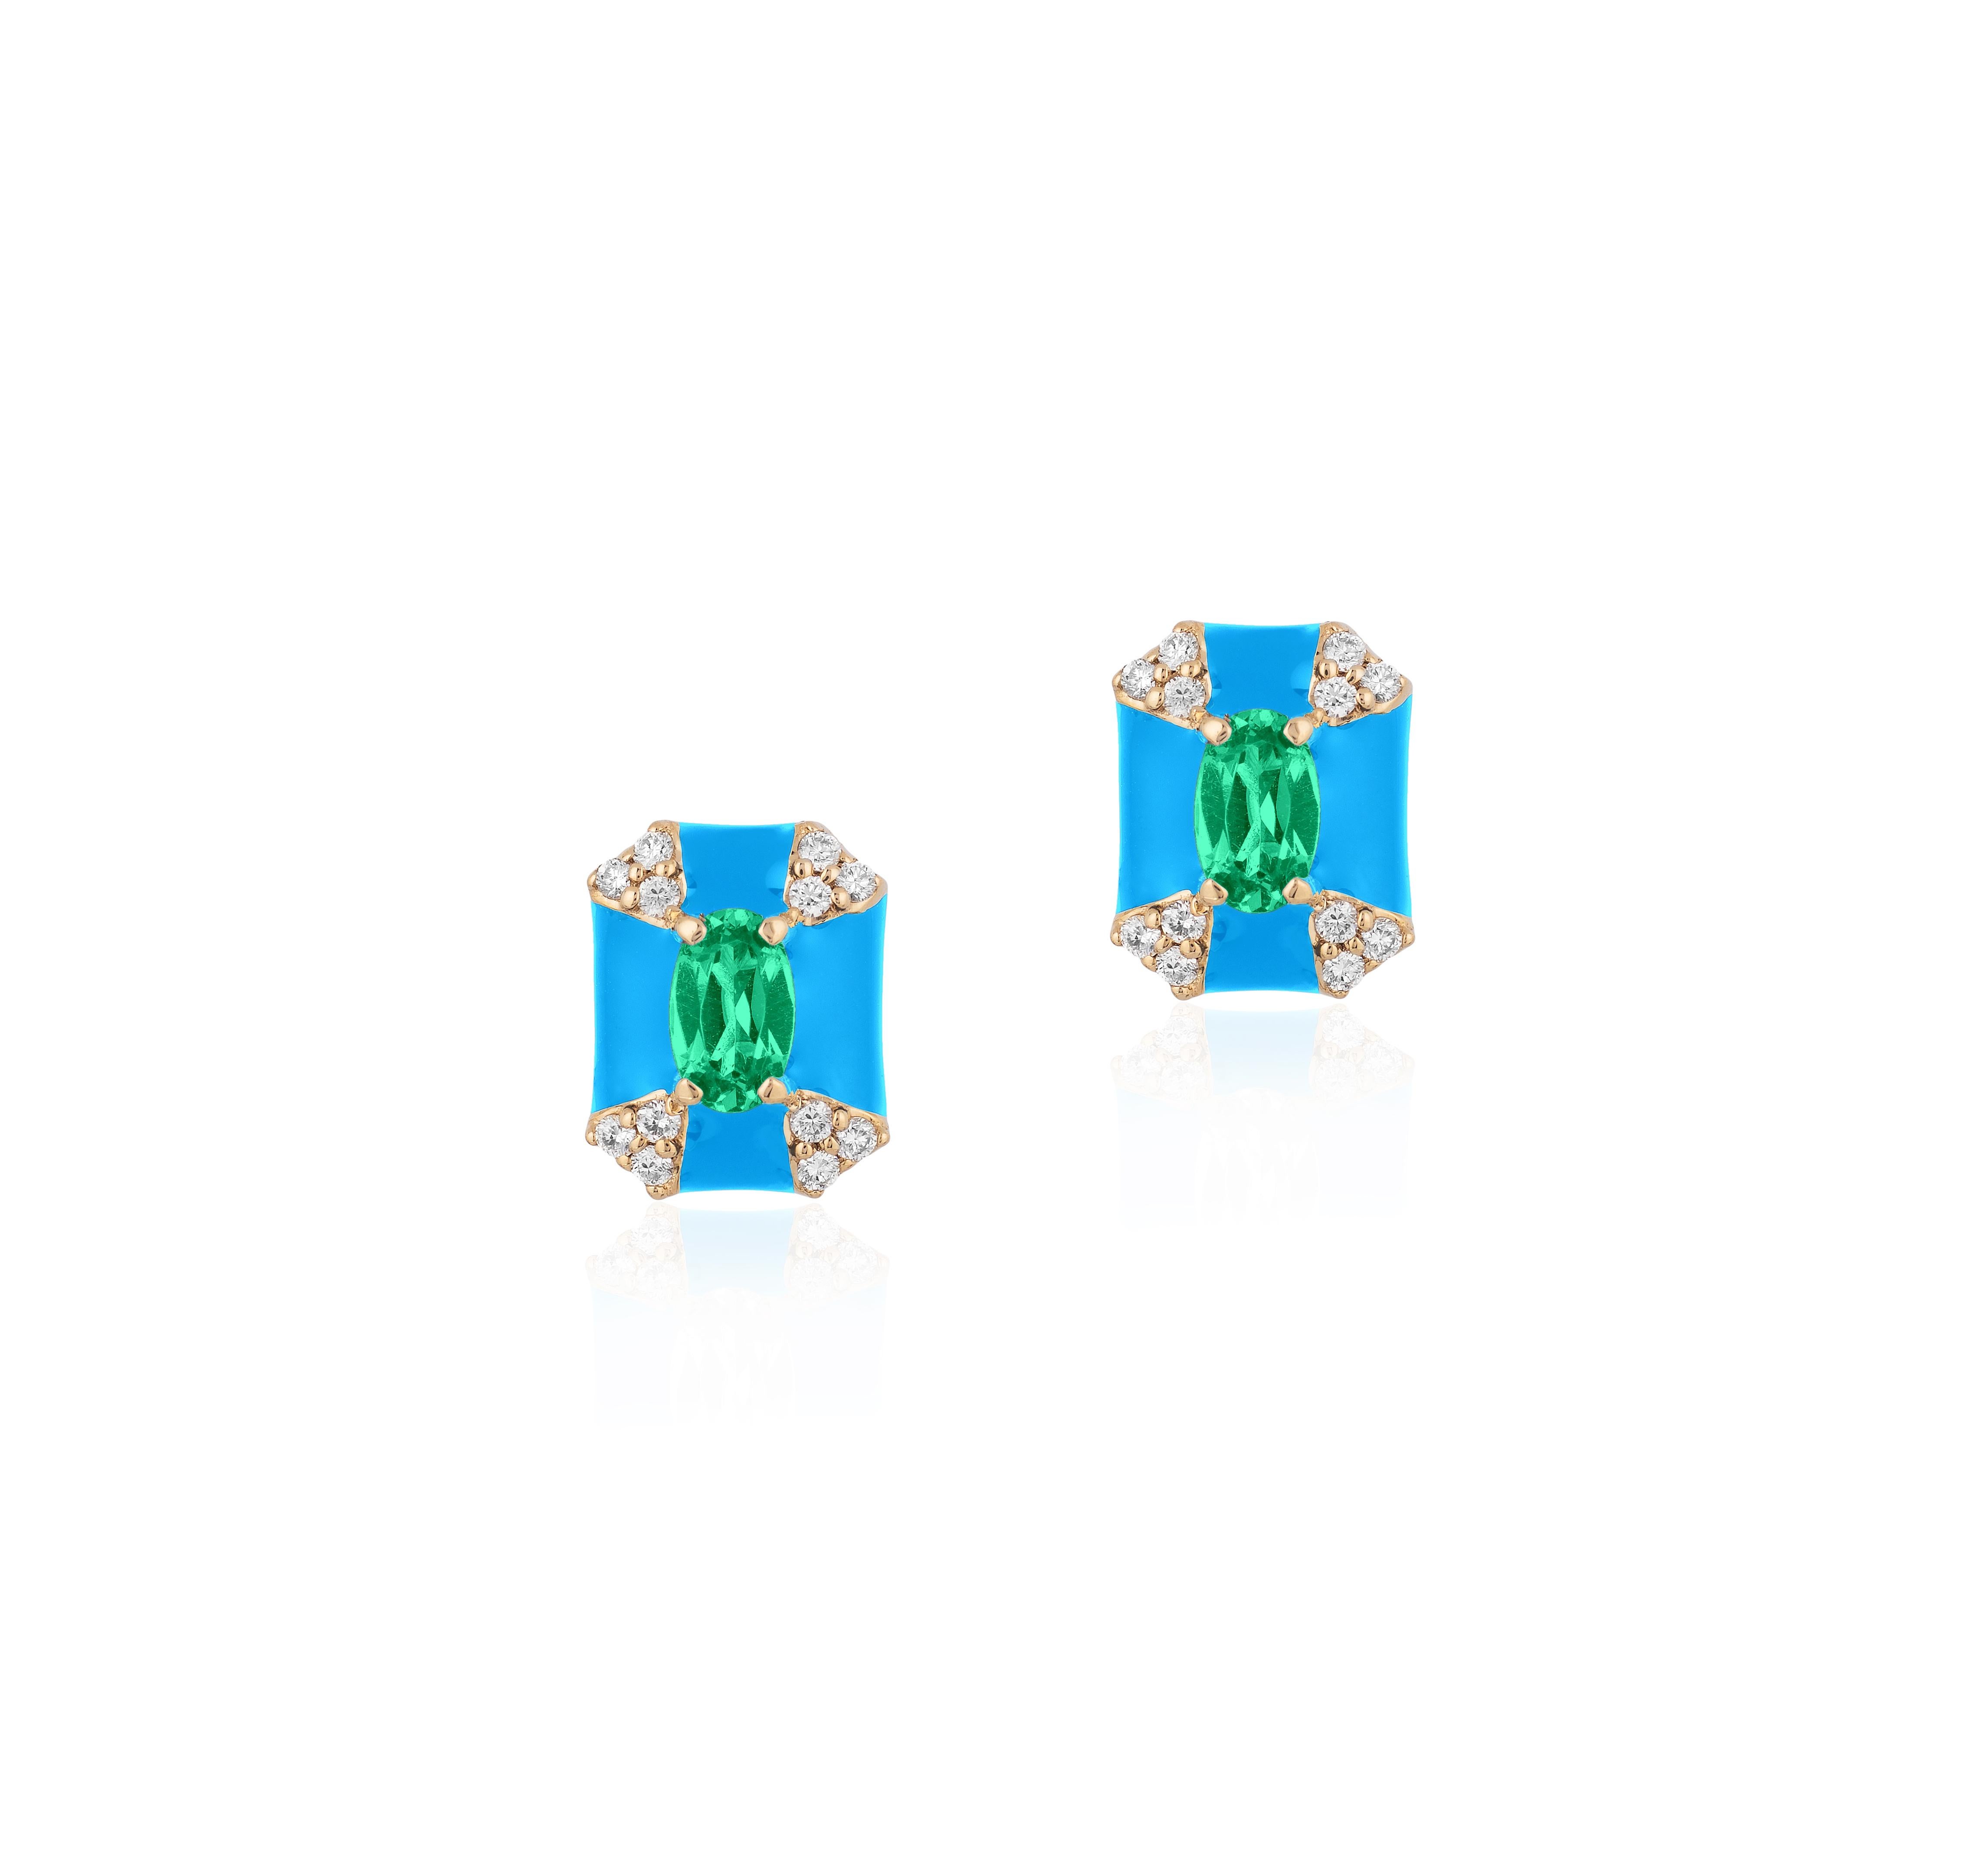 'Queen' Octagon Turquoise Enamel Stud Earrings with Emerald and Diamonds in 18K Yellow Gold.
Stone Size: 4 mm
Gemstone Approx. Wt: Emerald- 0.38 Carats 
Diamonds: G-H / VS, Approx. Wt: 0.14 Carats